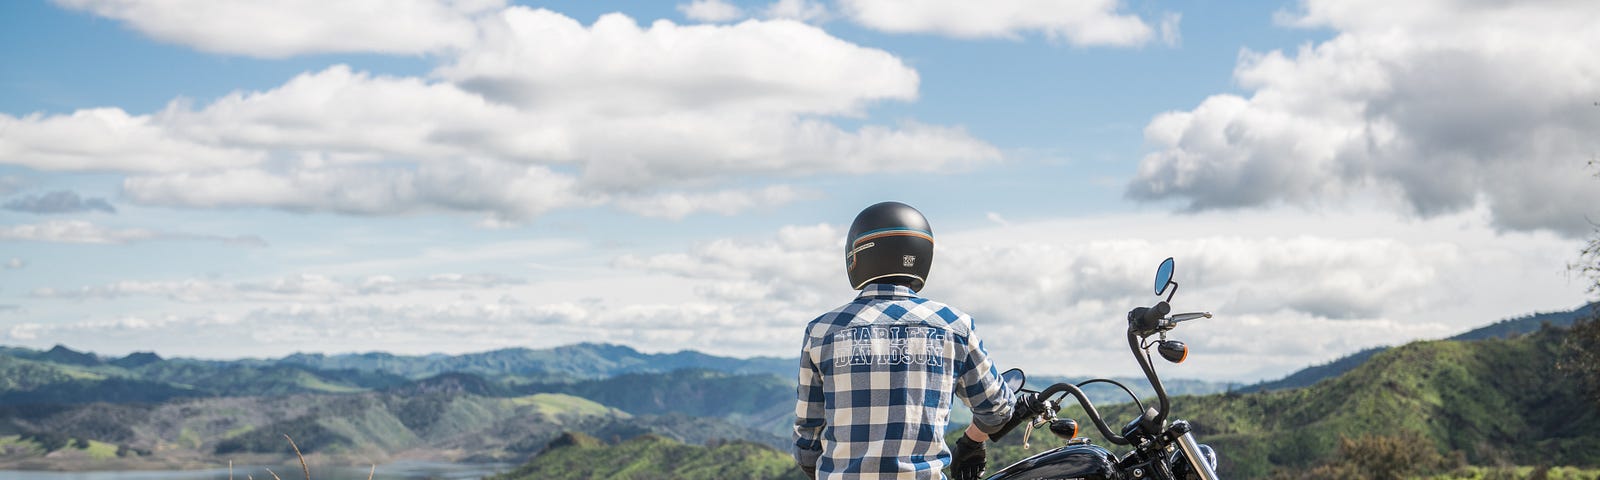 A person wearing a black helmet and a blue and white checked shirt leans against a black motorcycle and looks out at mountains and a river under a blue sky that is dotted with puffy clouds.